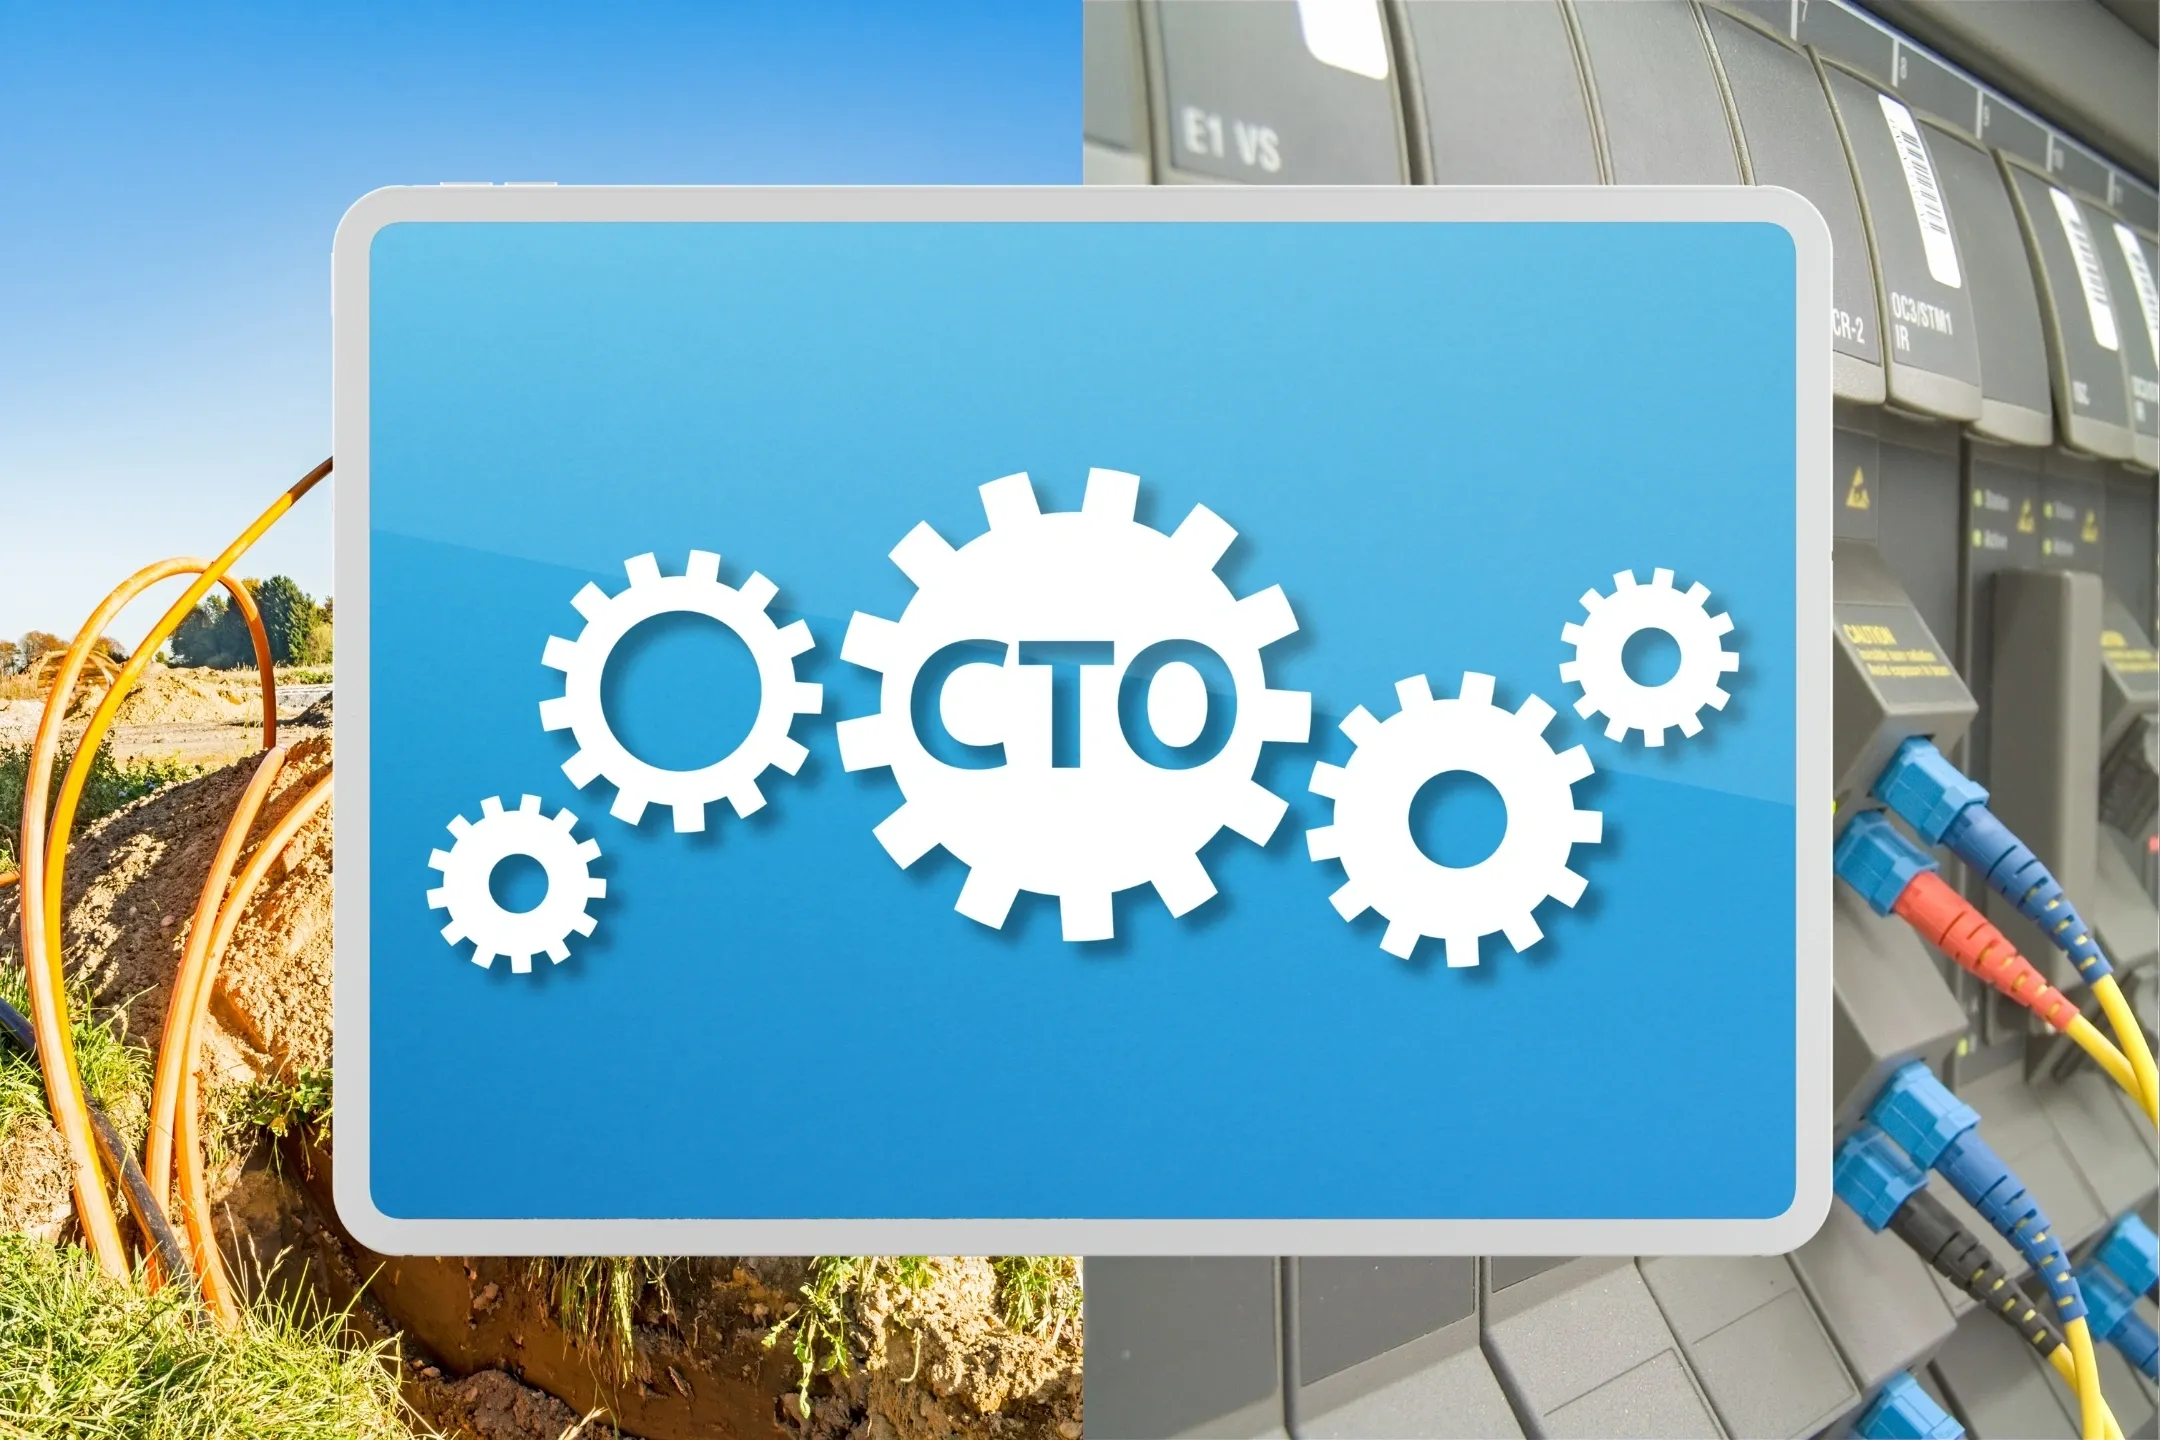 Broadband CTOs and Operations teams get what they need